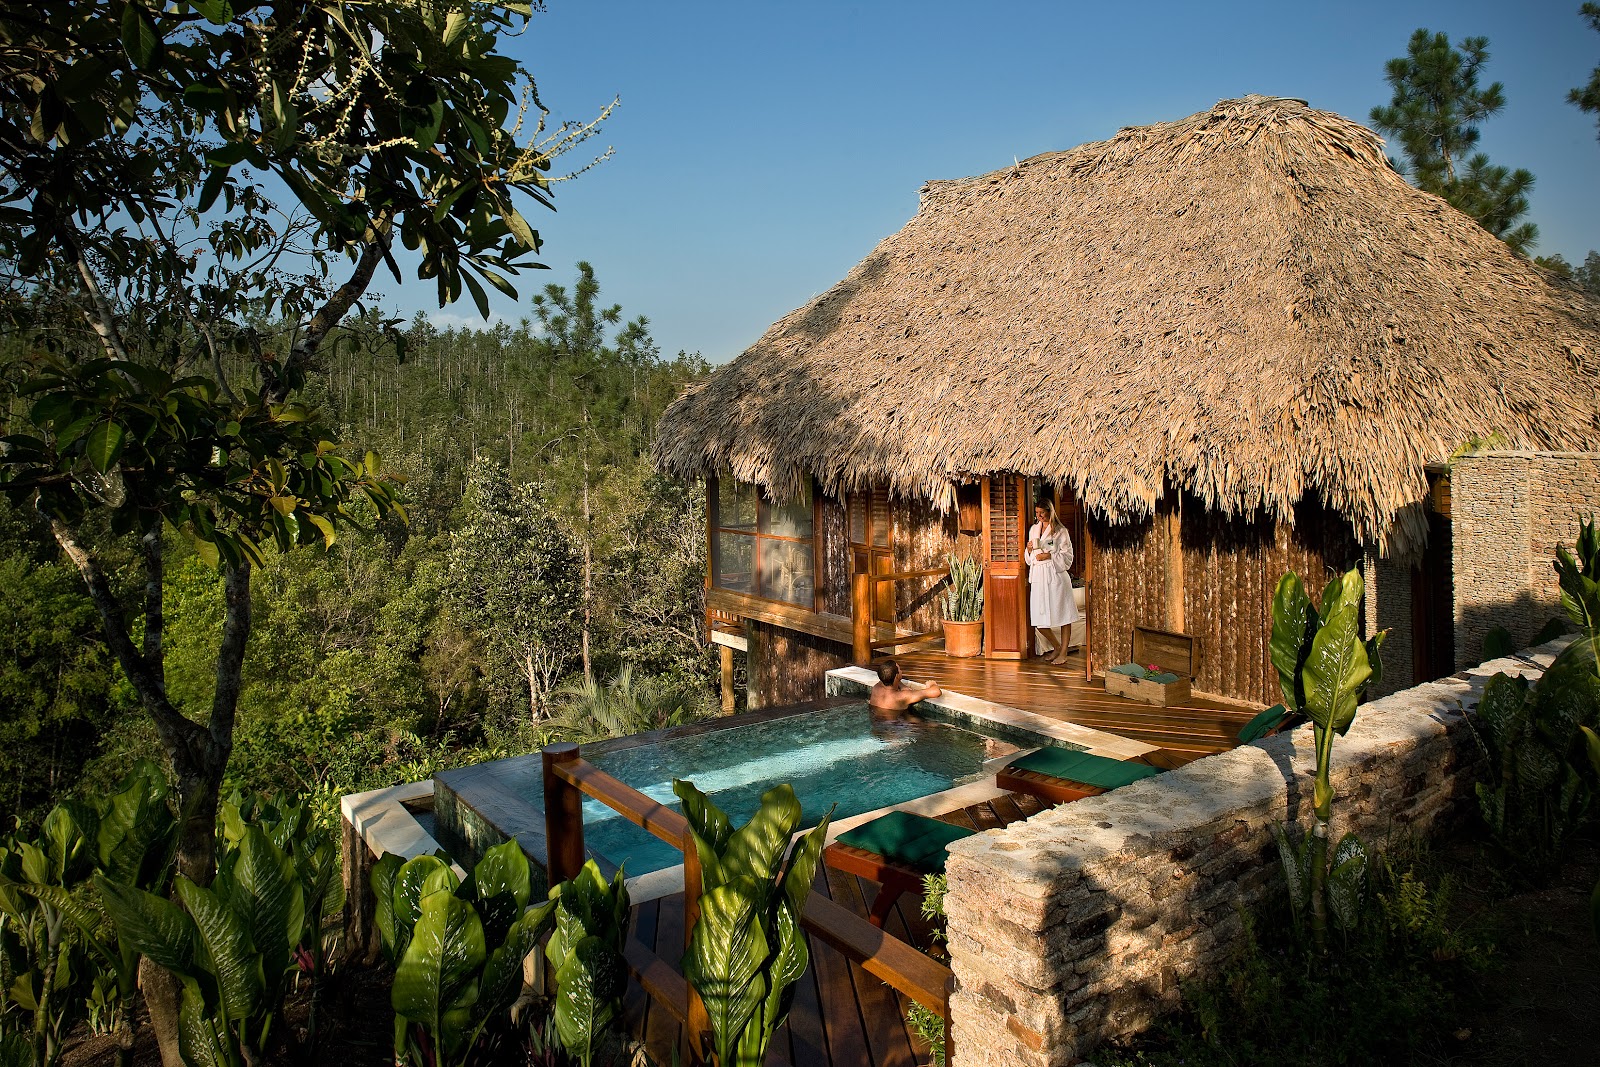 Enjoy Your Luxury Cabana In The Jungle!